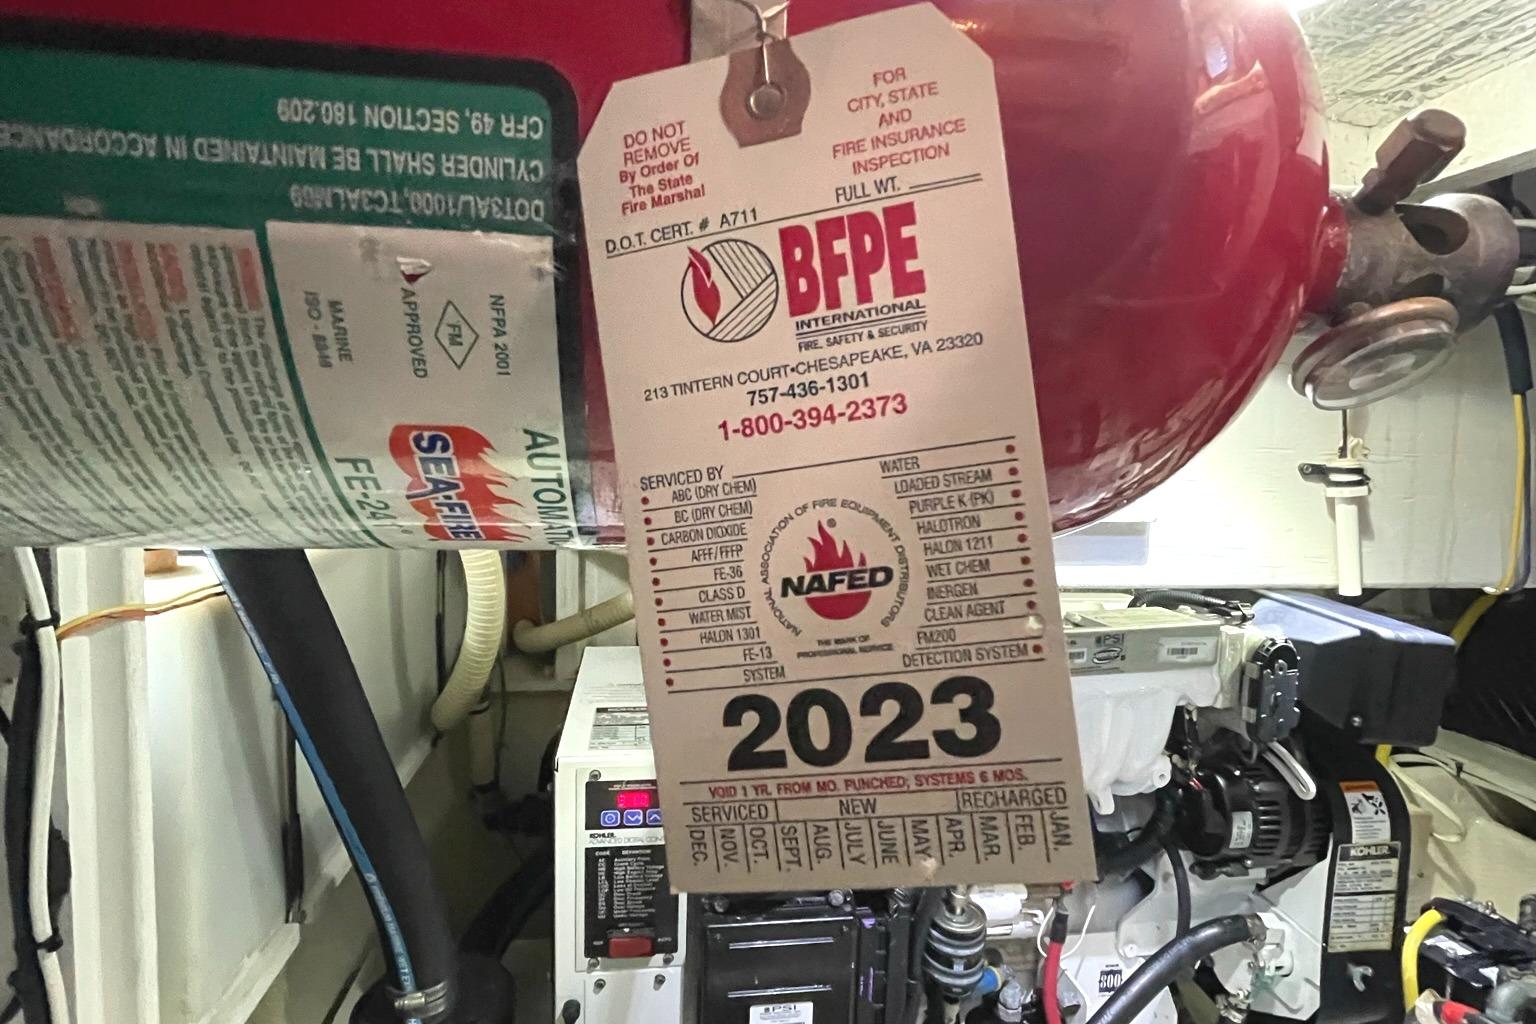 CURRENT ENGINE ROOM FIRE SUPPRESSION SYSTEM TAG!! 